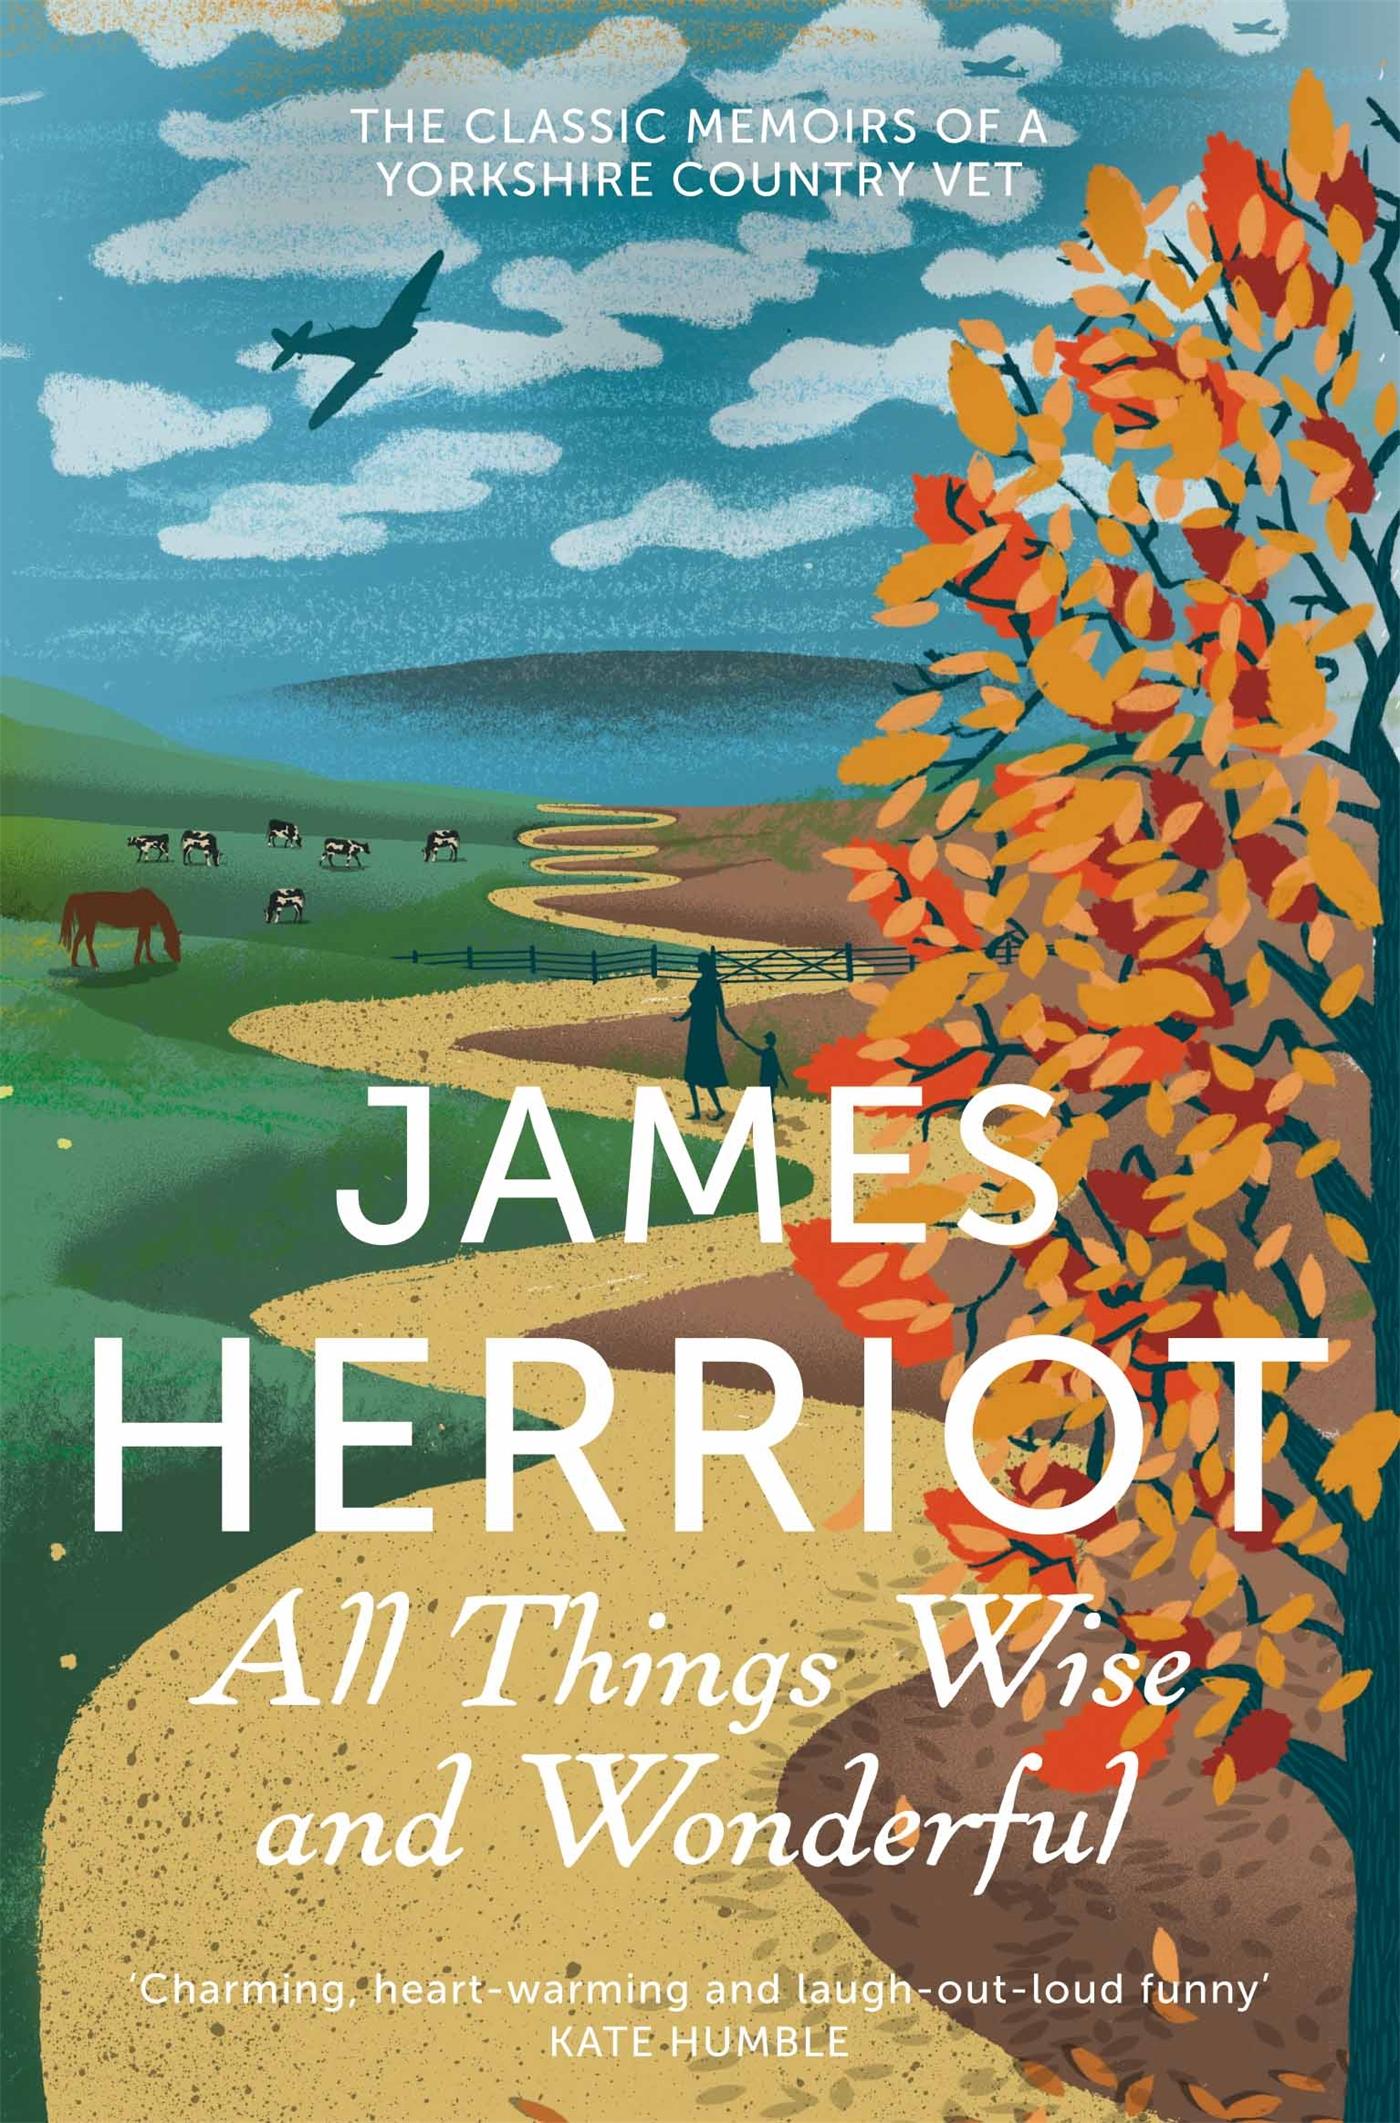 All Things Wise and Wonderful / The Classic Memoirs of a Yorkshire Country Vet / James Herriot / Taschenbuch / 592 S. / Englisch / 2013 / Pan Macmillan / EAN 9781447226062 - Herriot, James